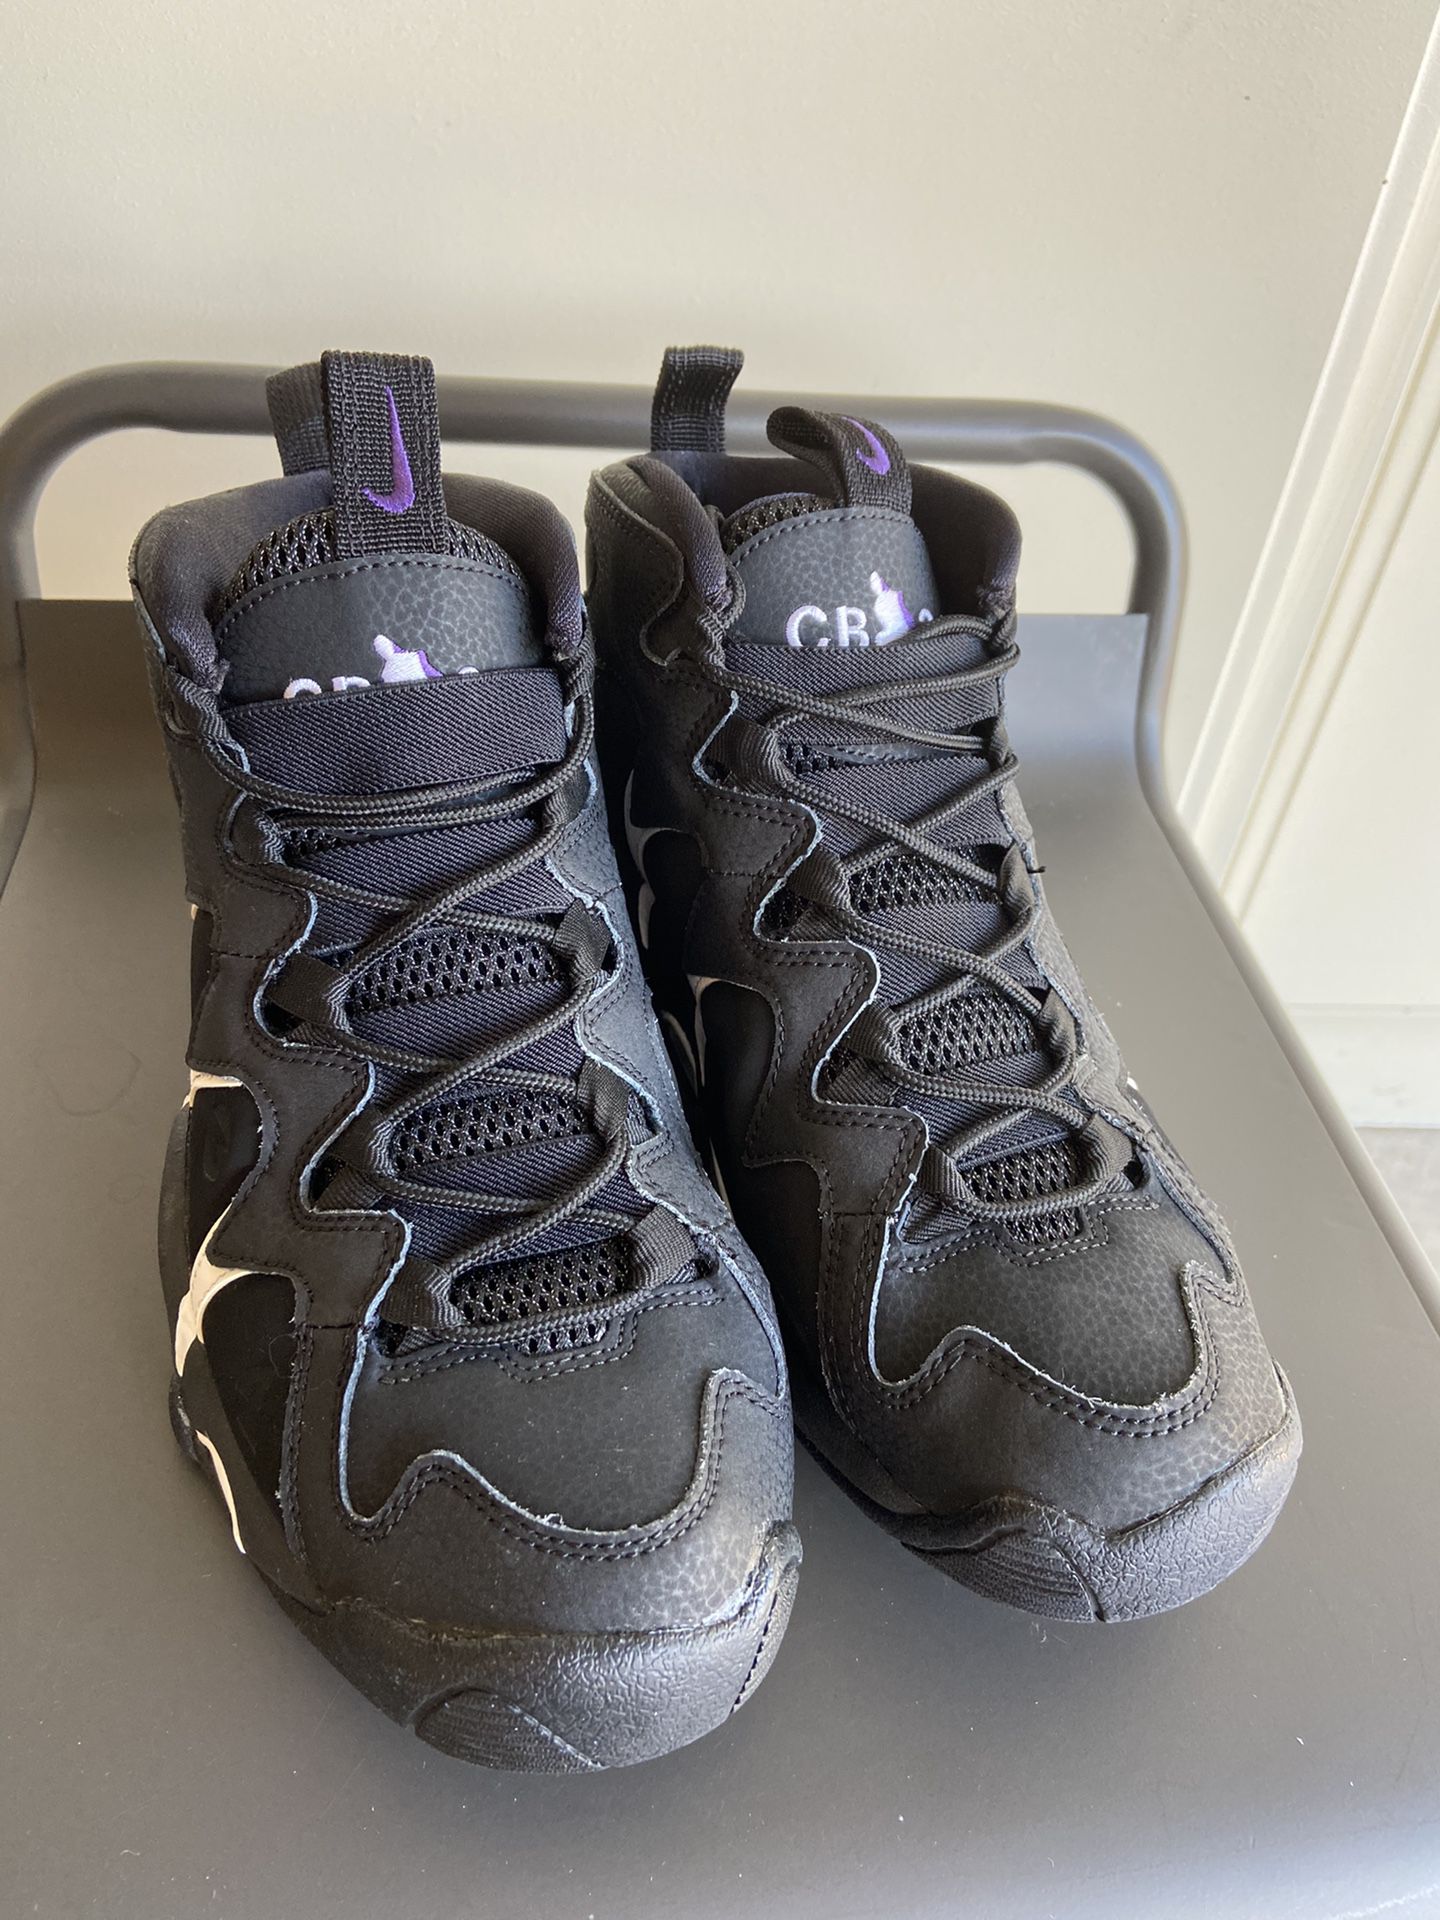 Nike Air Max CB34 “Suns Away” Size 9 Brand New